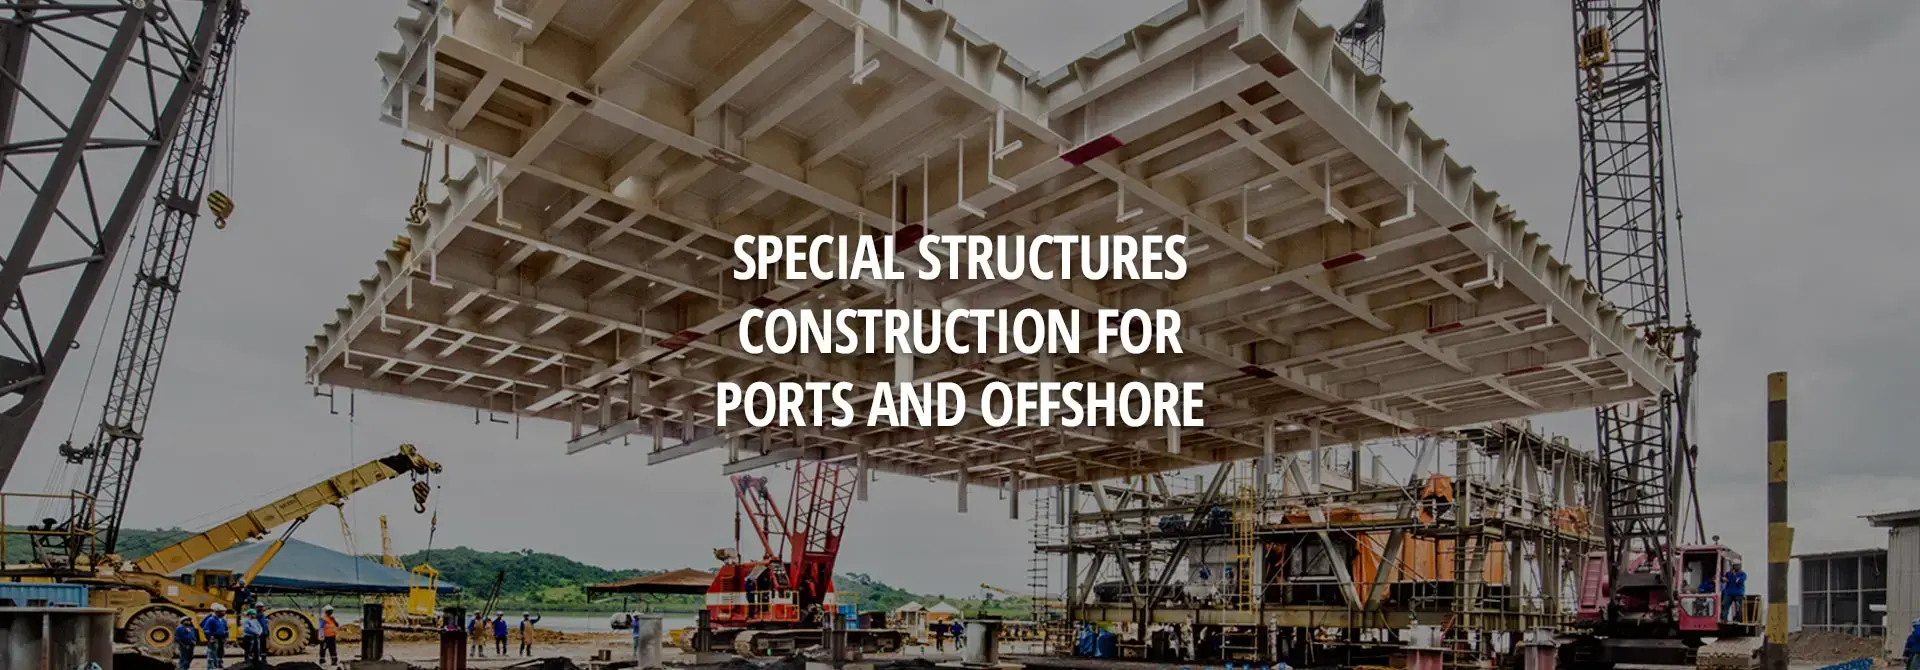 OFFSHORE SERVICES - Special Structures Construction For Ports And Offshore 